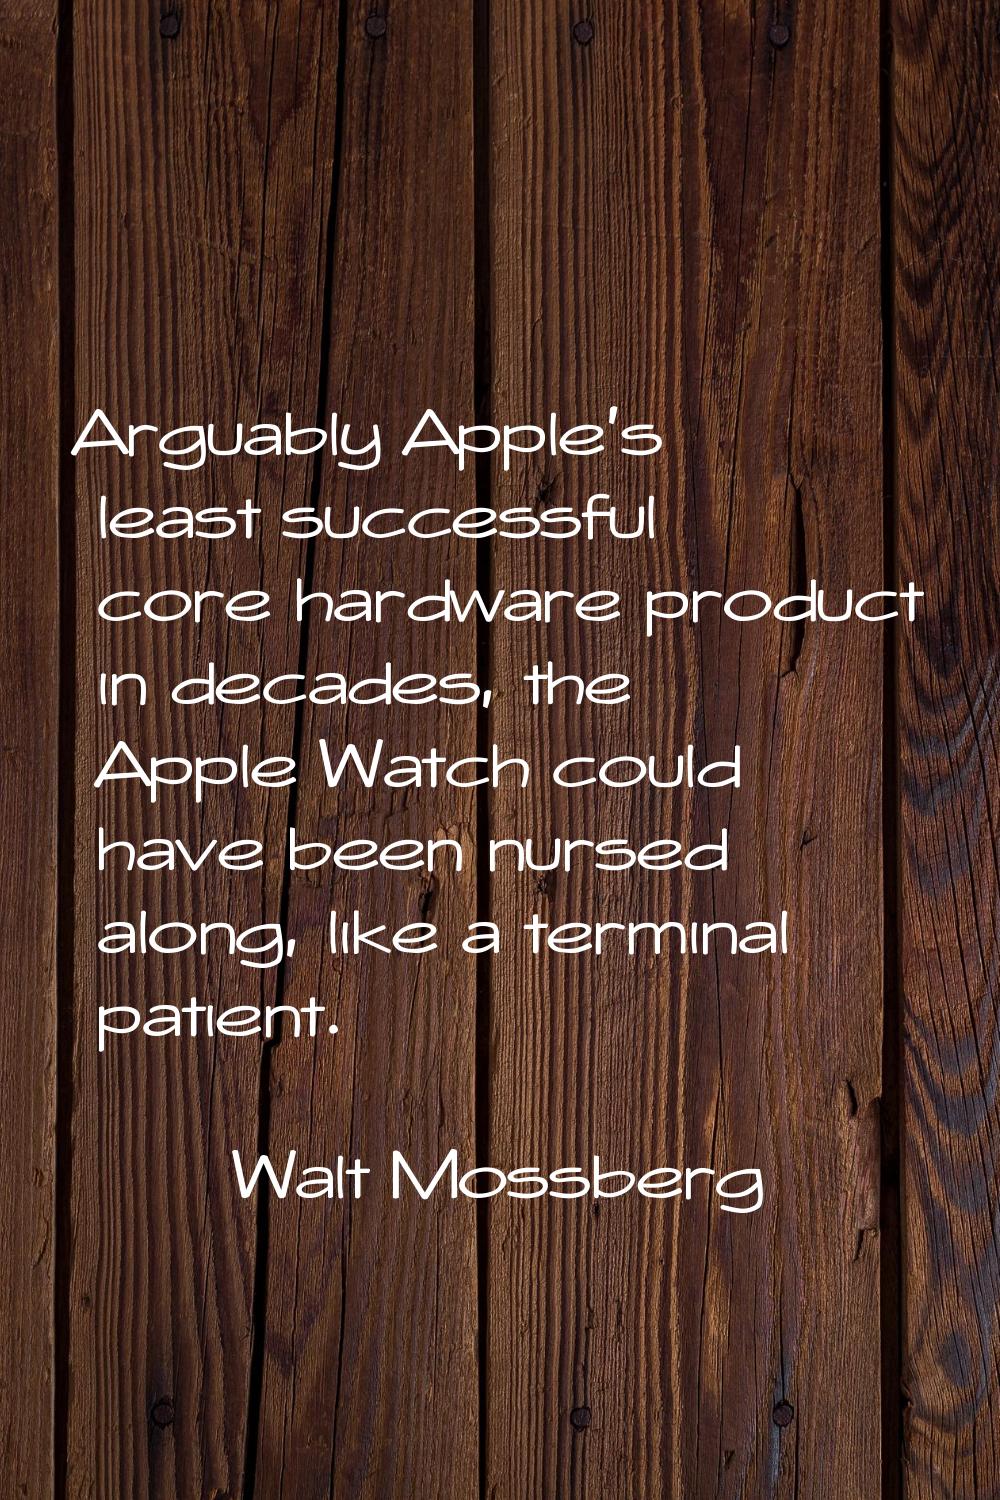 Arguably Apple's least successful core hardware product in decades, the Apple Watch could have been